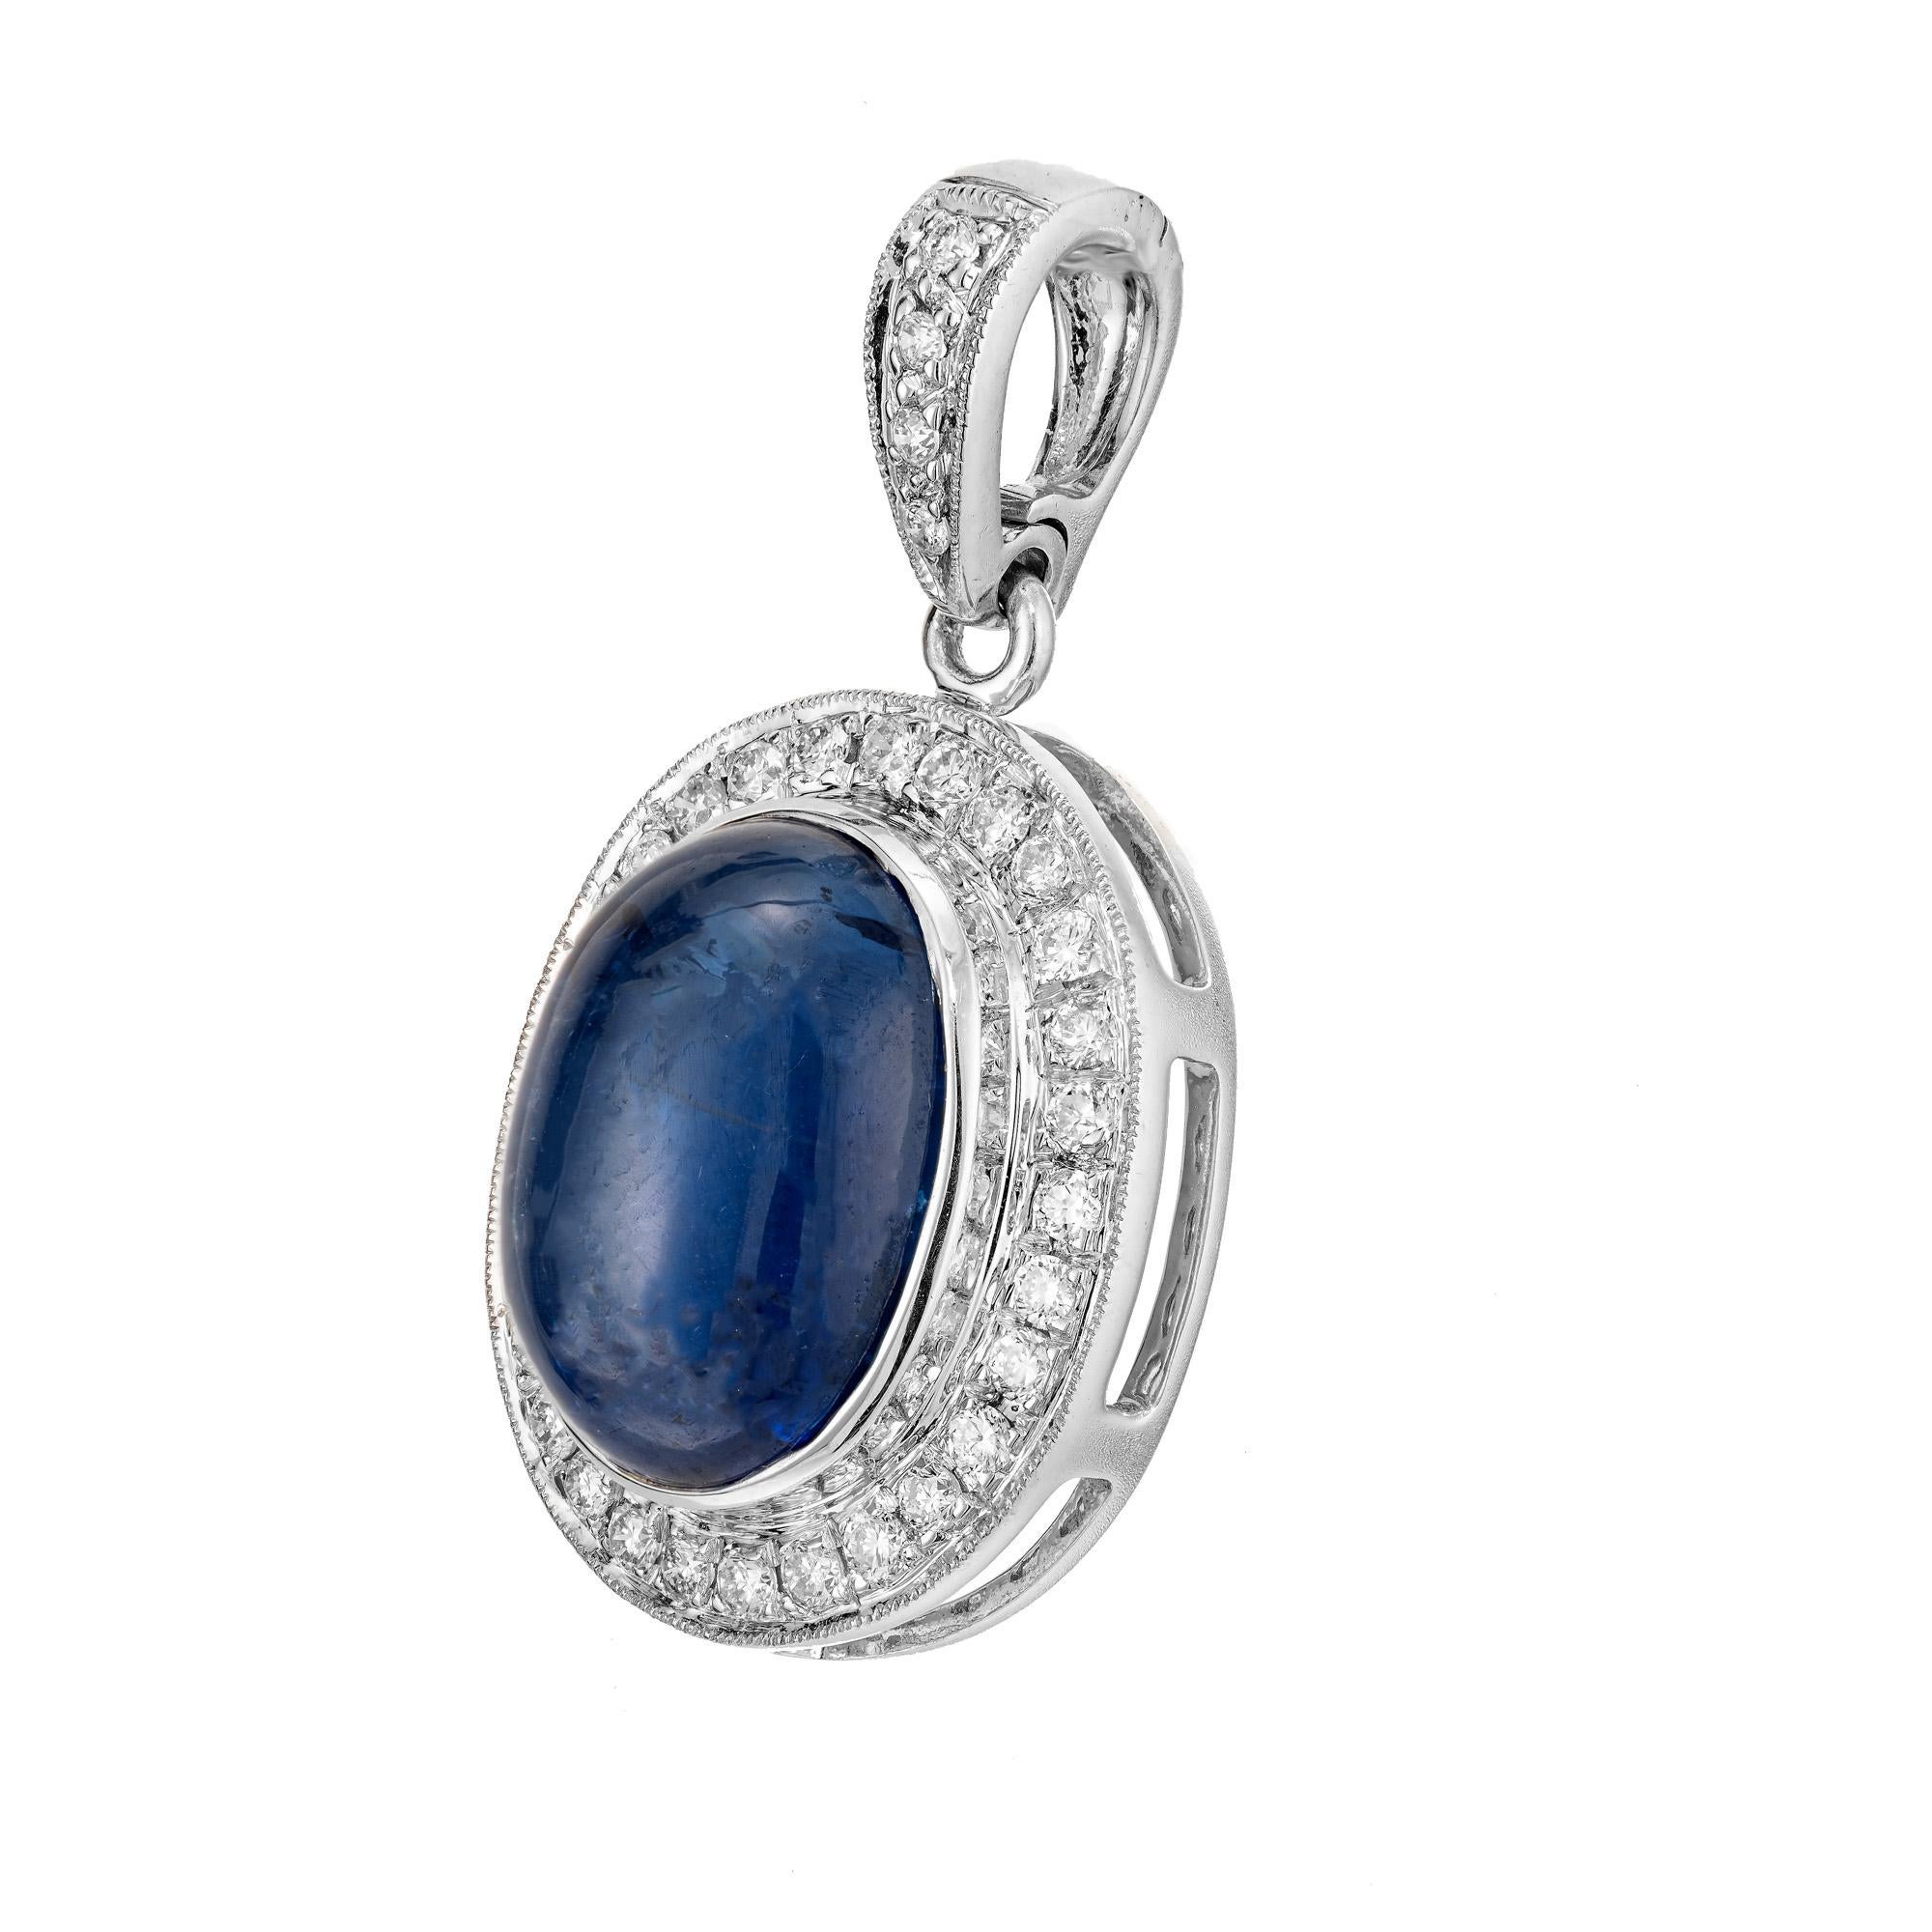 Oval sapphire and diamonds halo pendant.  Cabochon center sapphire set in 18k white gold with a halo of 33 round cut diamonds. The sapphire is from an early 1900's estate. The setting was created in the Peter Suchy workshop. 

1 oval sapphire